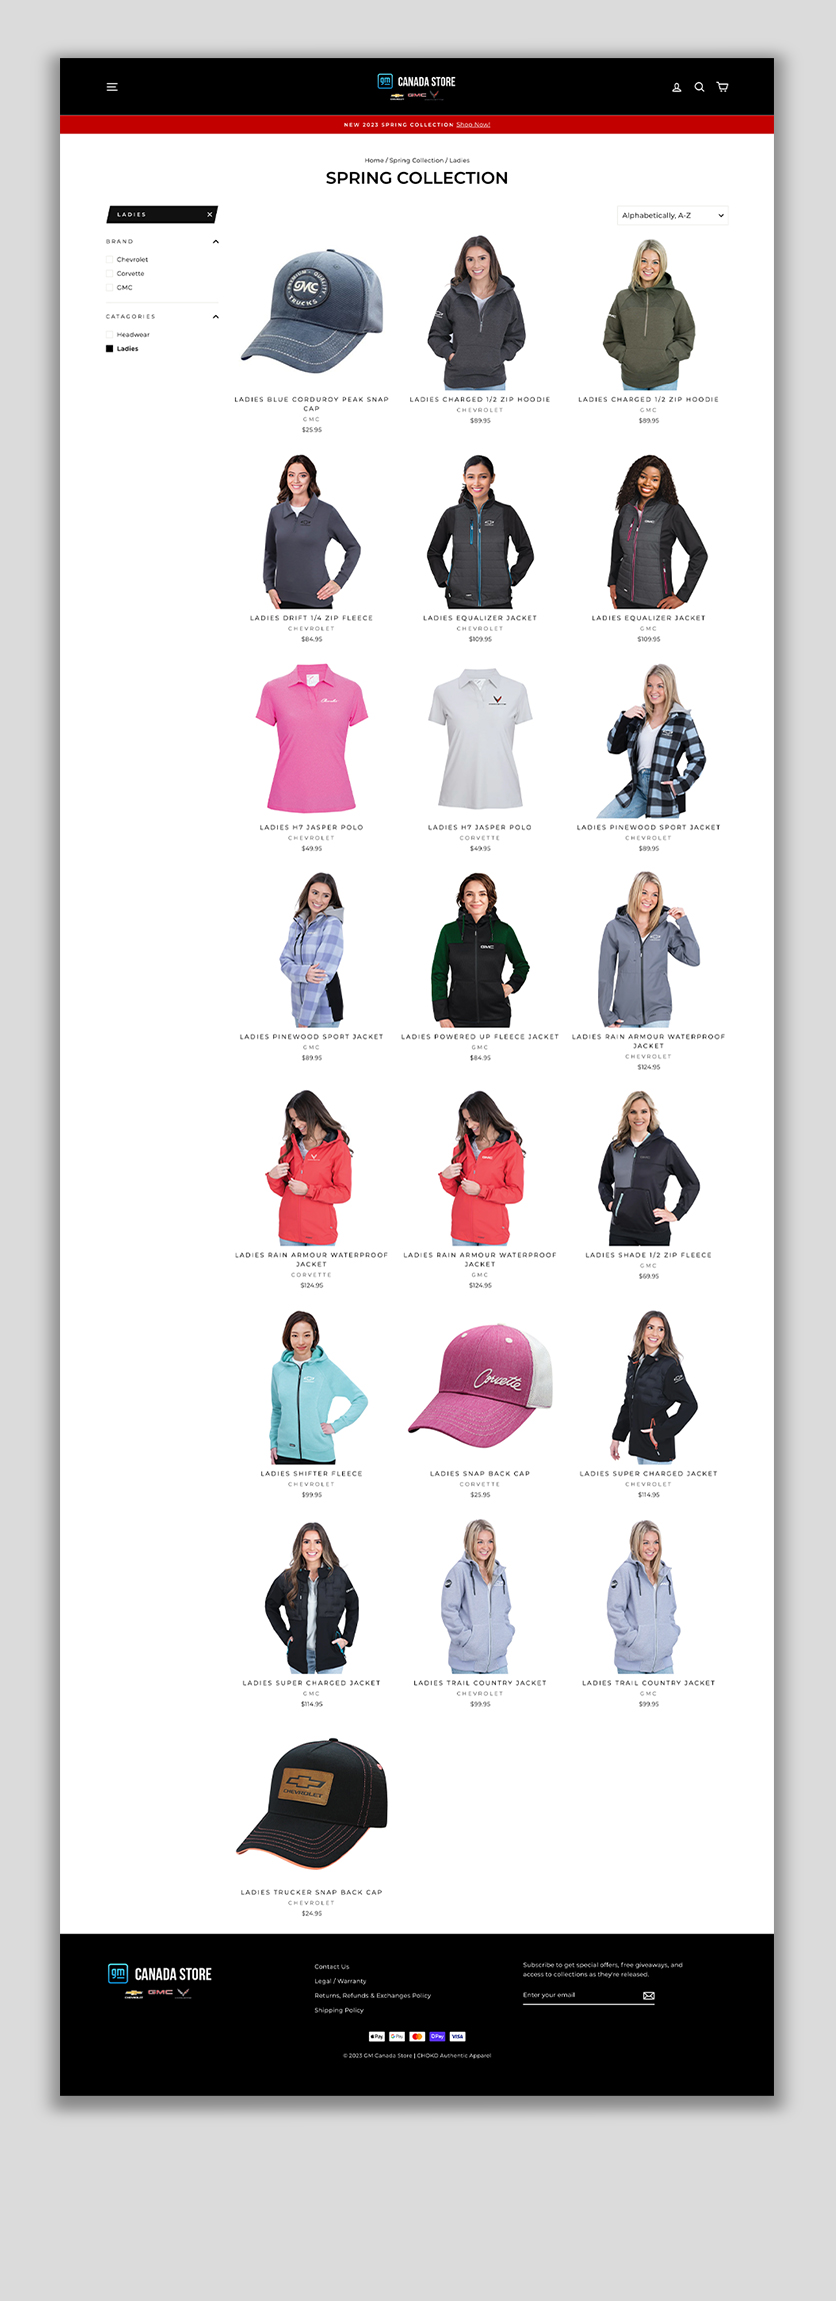 gm-canada-store-spring-collection-womens-website-design3